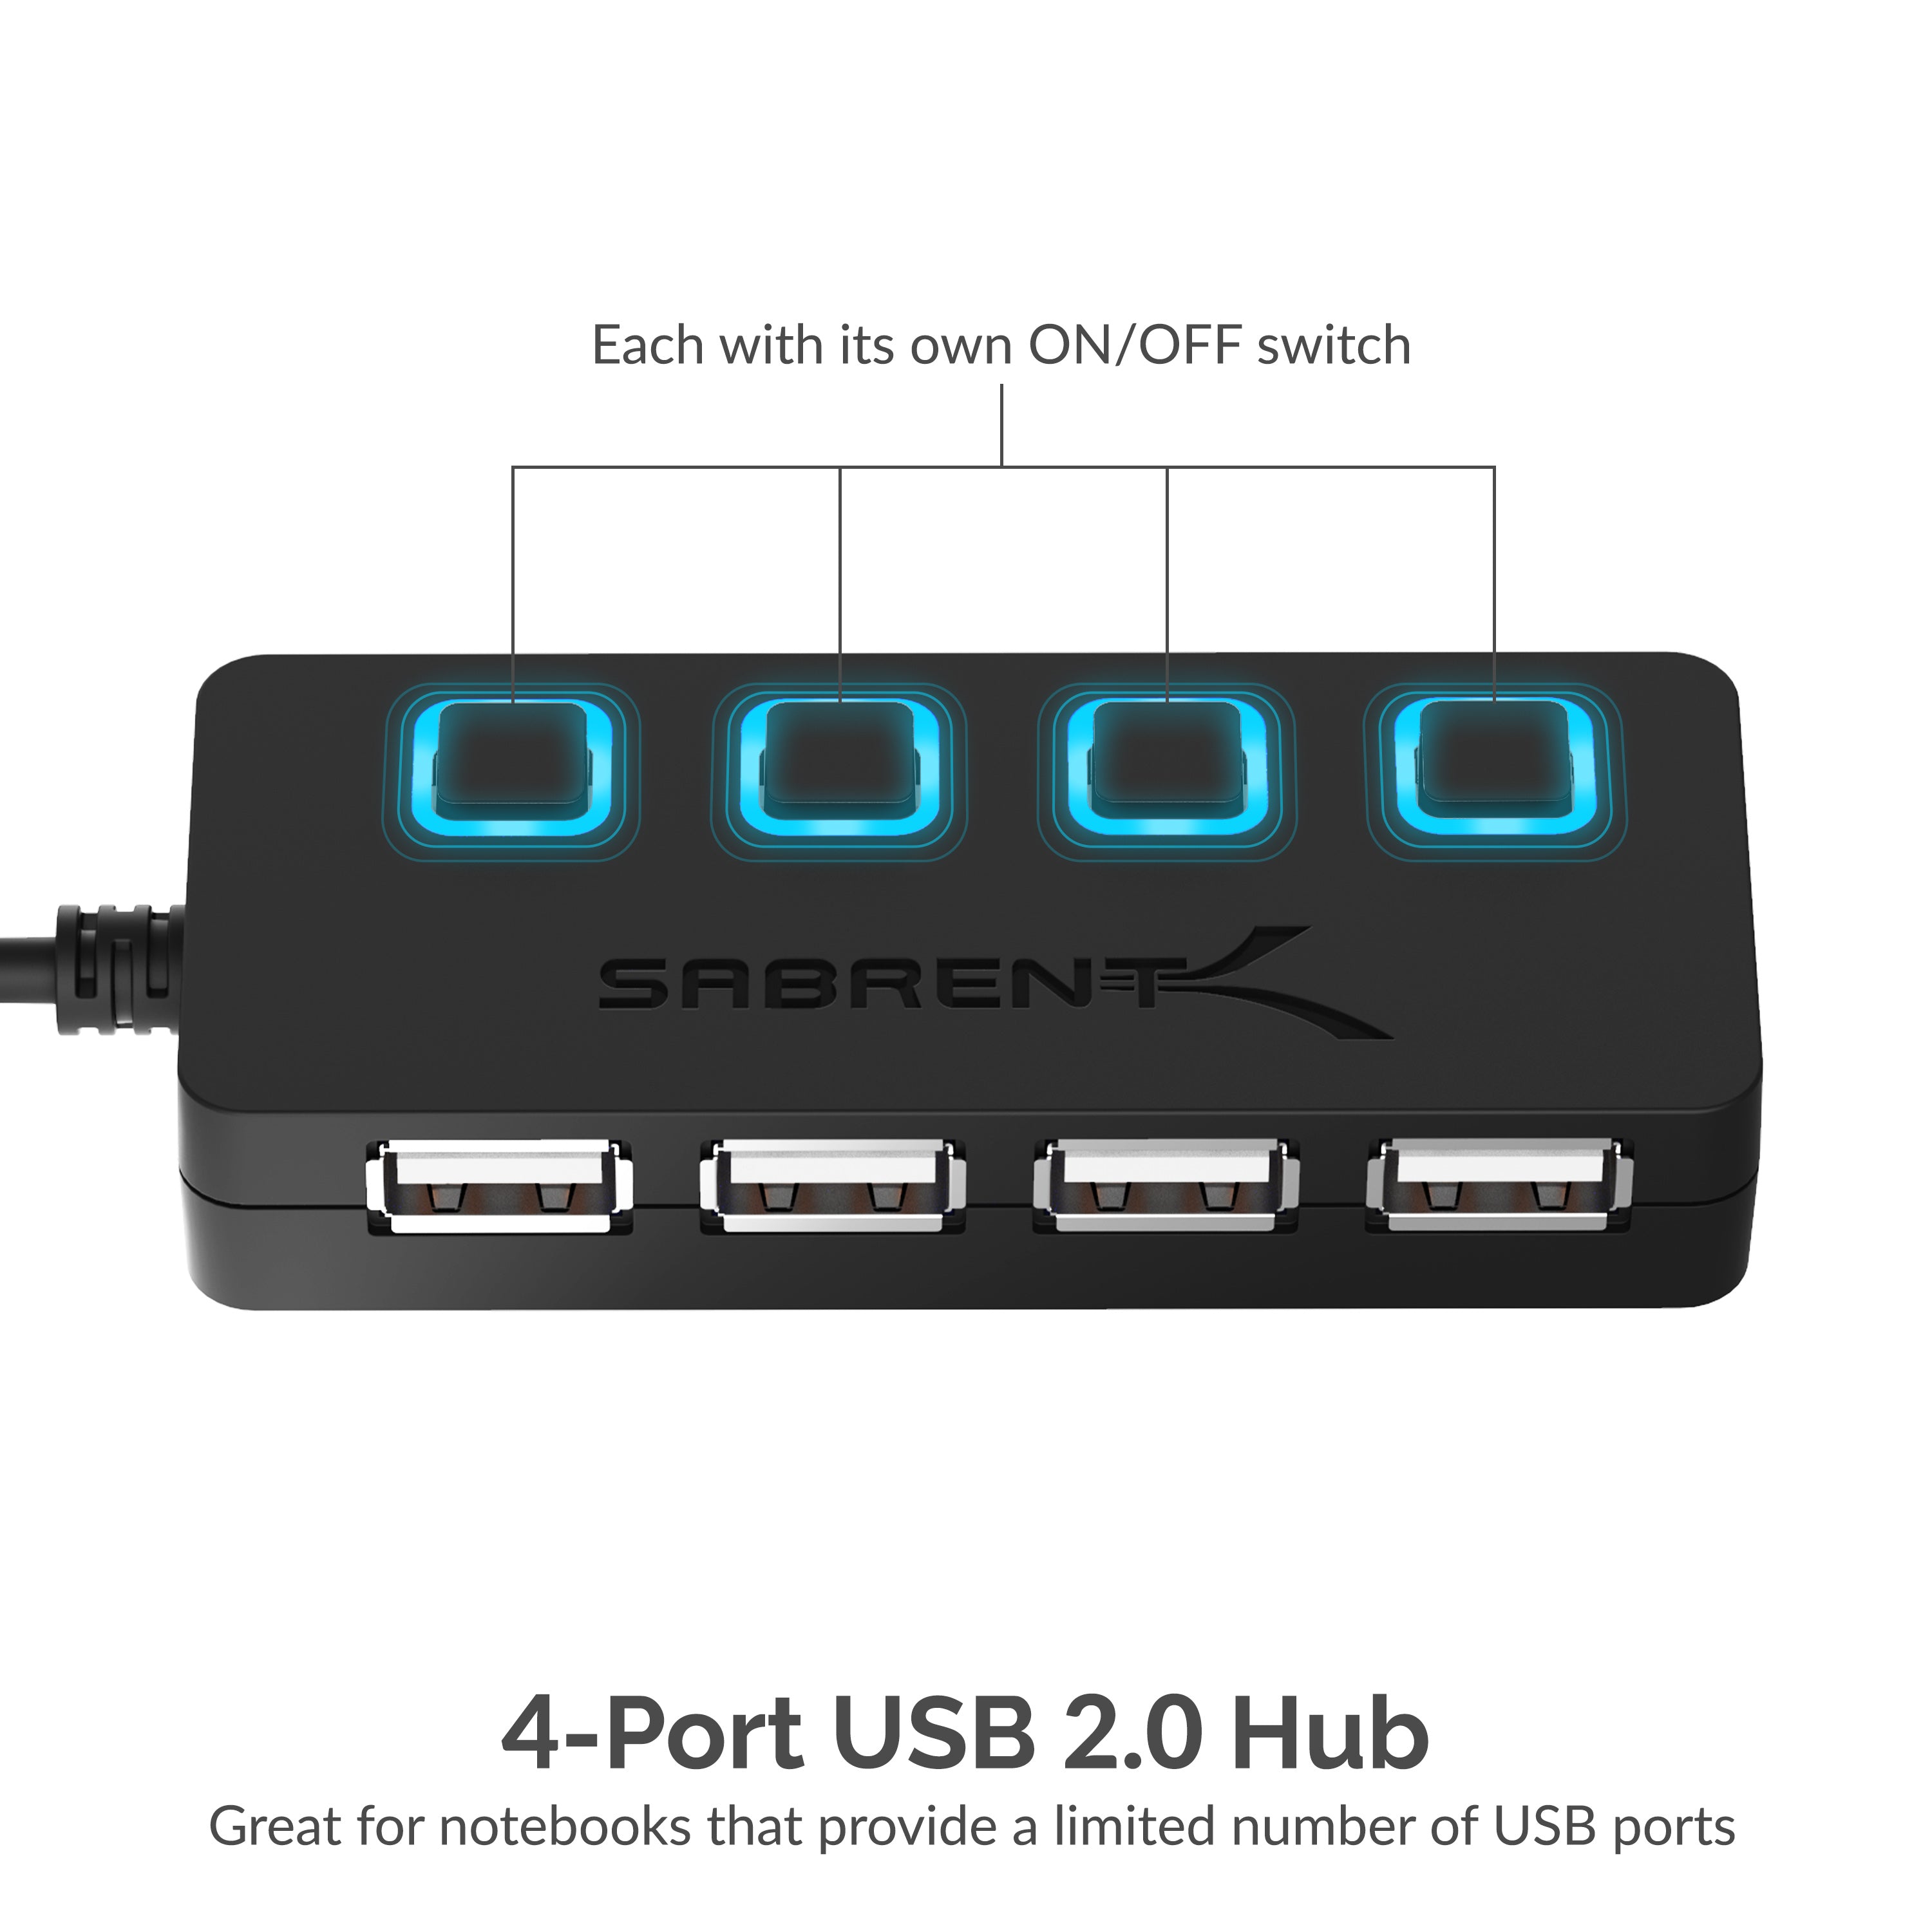 USB 2.0 Sharing Switch - Sabrent